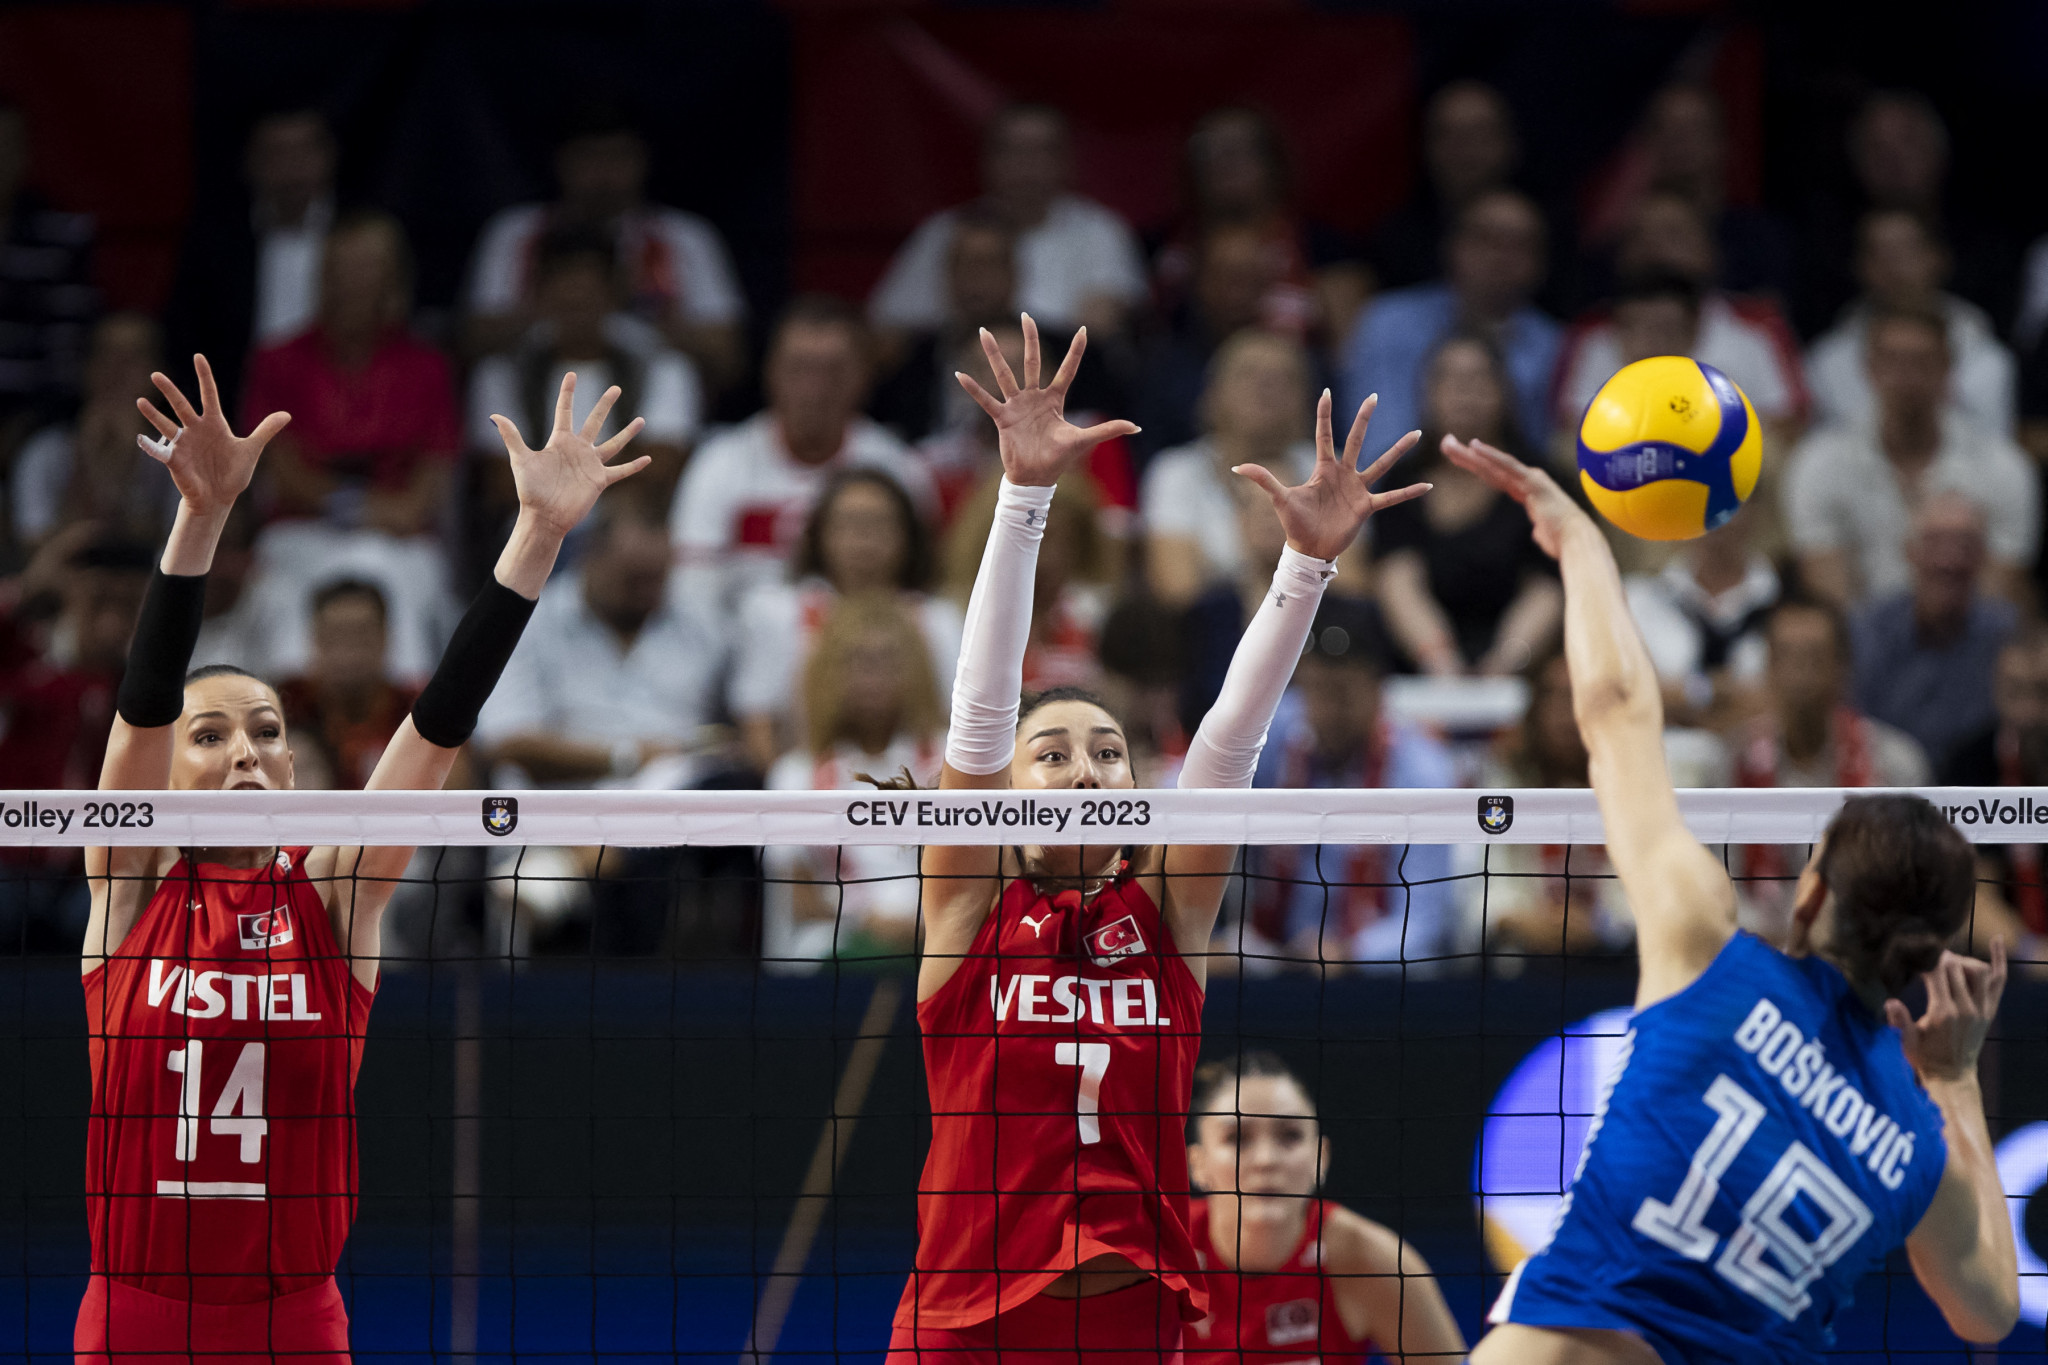 Turkey claim dramatic victory at Women's European Volleyball Championship